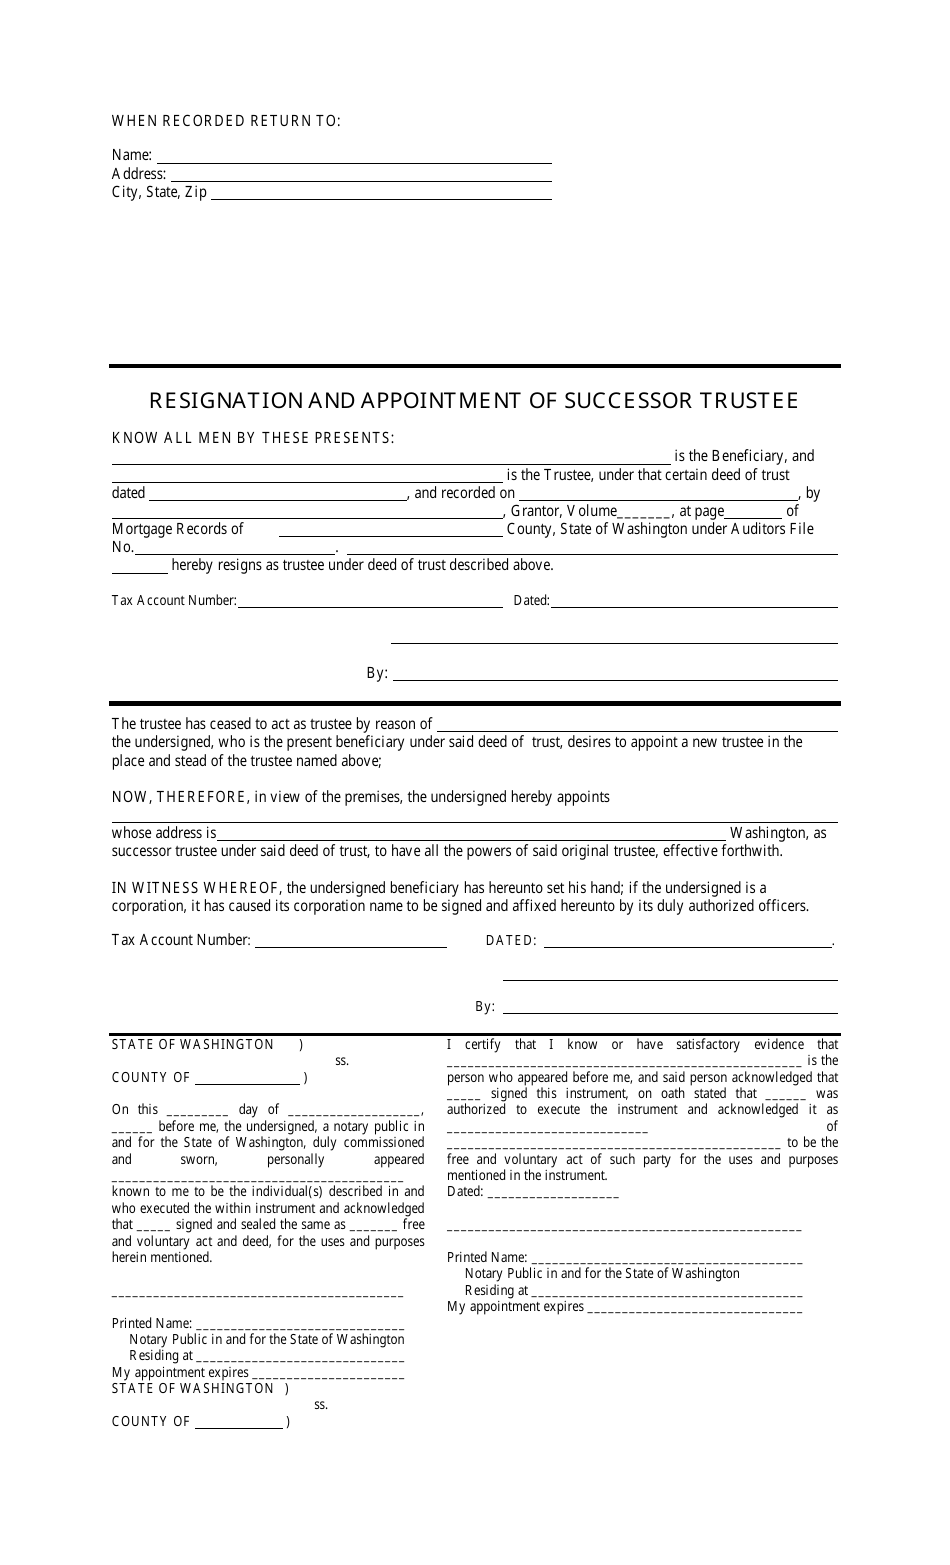 Resignation and Appointment of Successor Trustee - Washington Document Preview